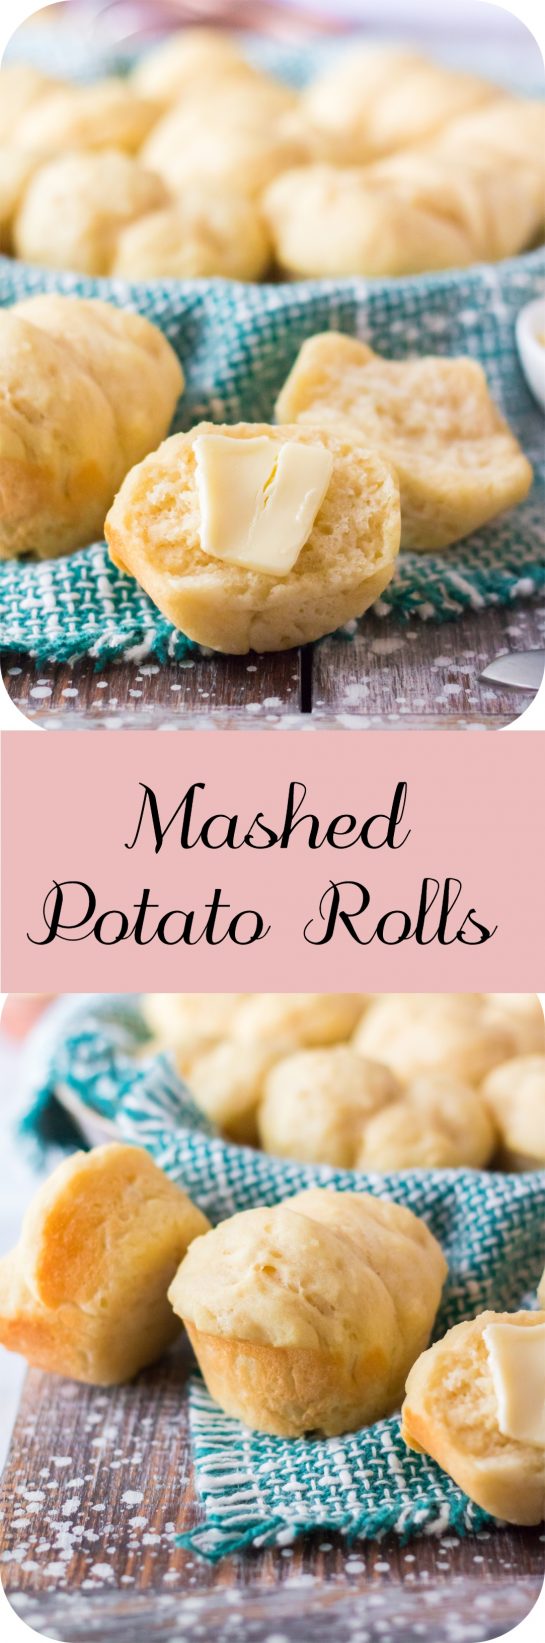 Easy, Best Mashed Potato Rolls recipe is classic, family favorite roll that is easy to make.  These rolls are tender, fluffy and slightly sweet.  Leftover mashed potatoes are the secret ingredient to these addictive little rolls of perfection.  